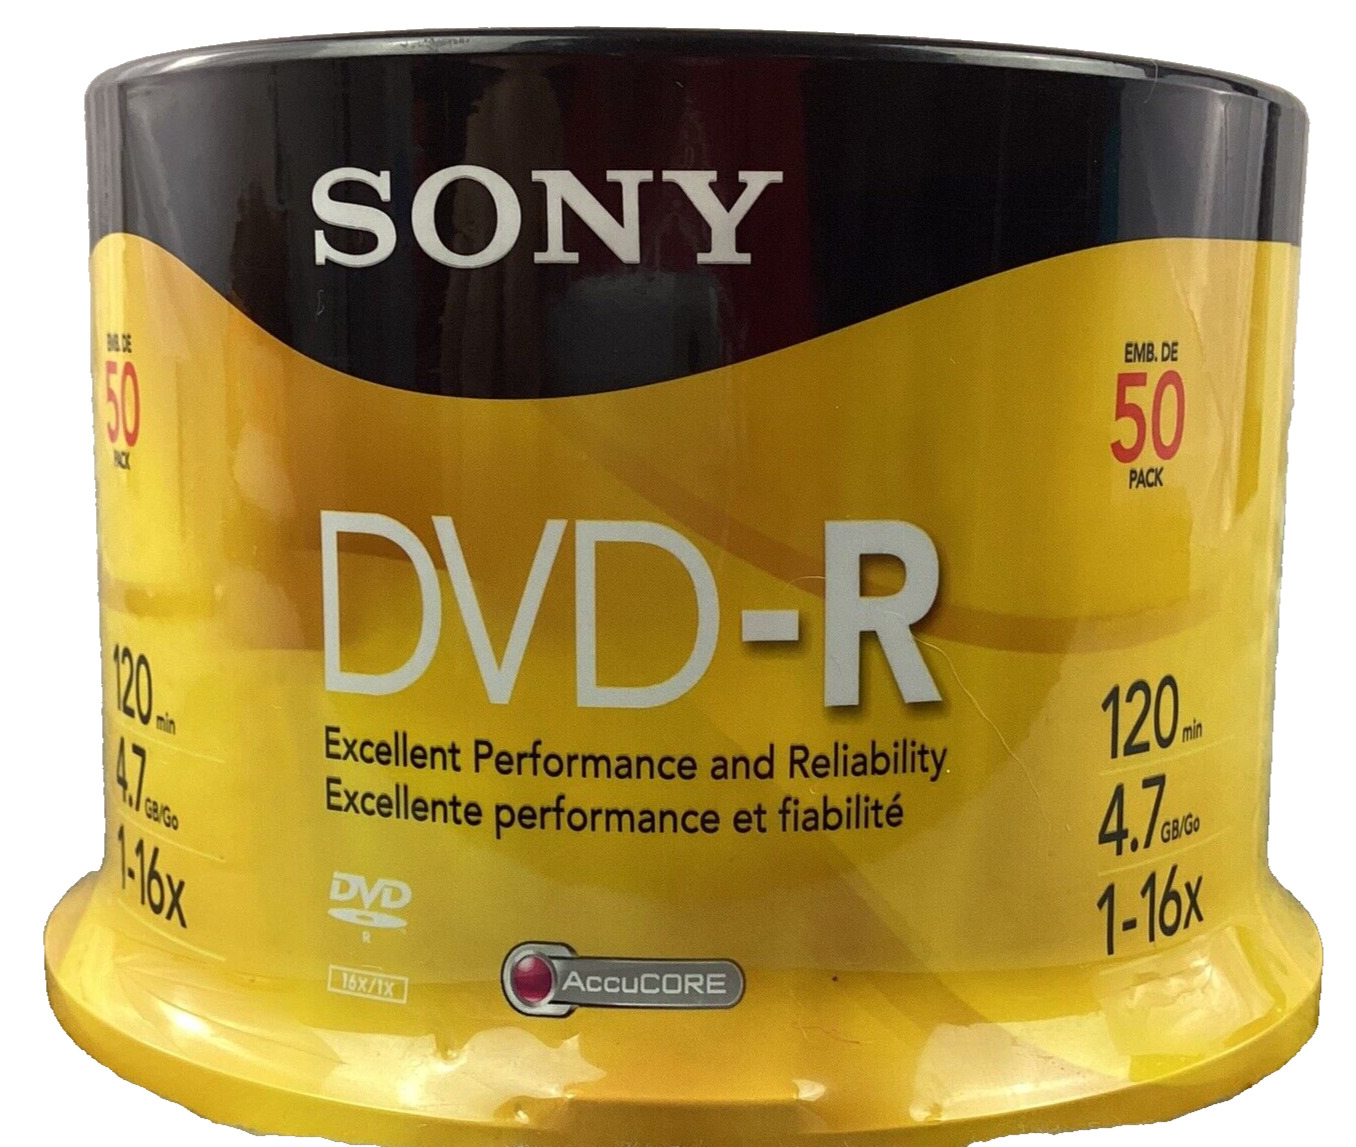 SONY DVD-R 50 Pack 120 Minutes 4.7 GB Blank Media Disc Sealed New